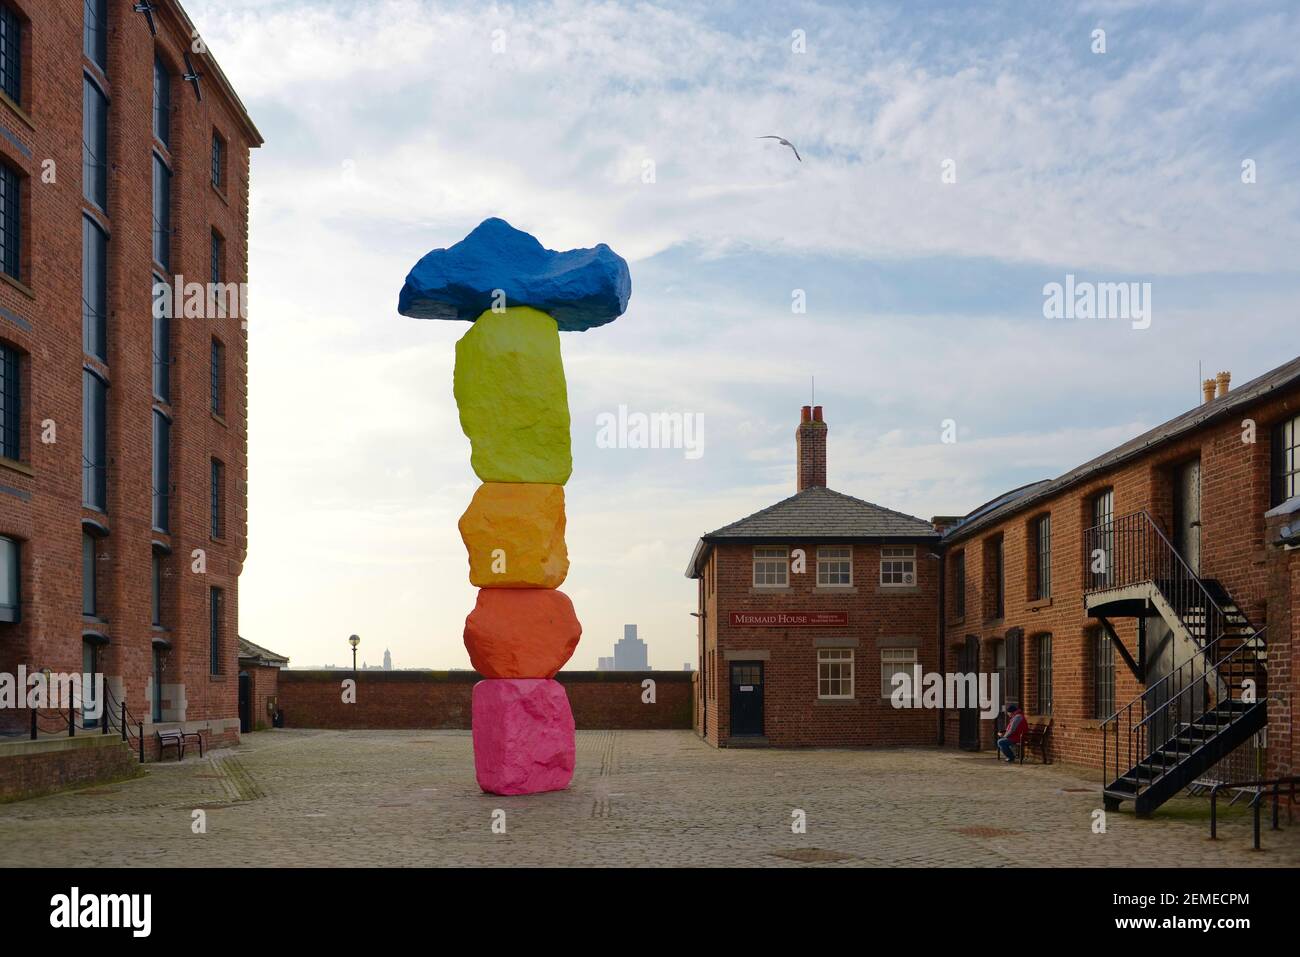 Liverpool, United Kingdom, 2nd February, 2020: Vibrant colors of the liverpool mountain sculpture by Ugo Rondinone against blue sky outside Tate. Stock Photo